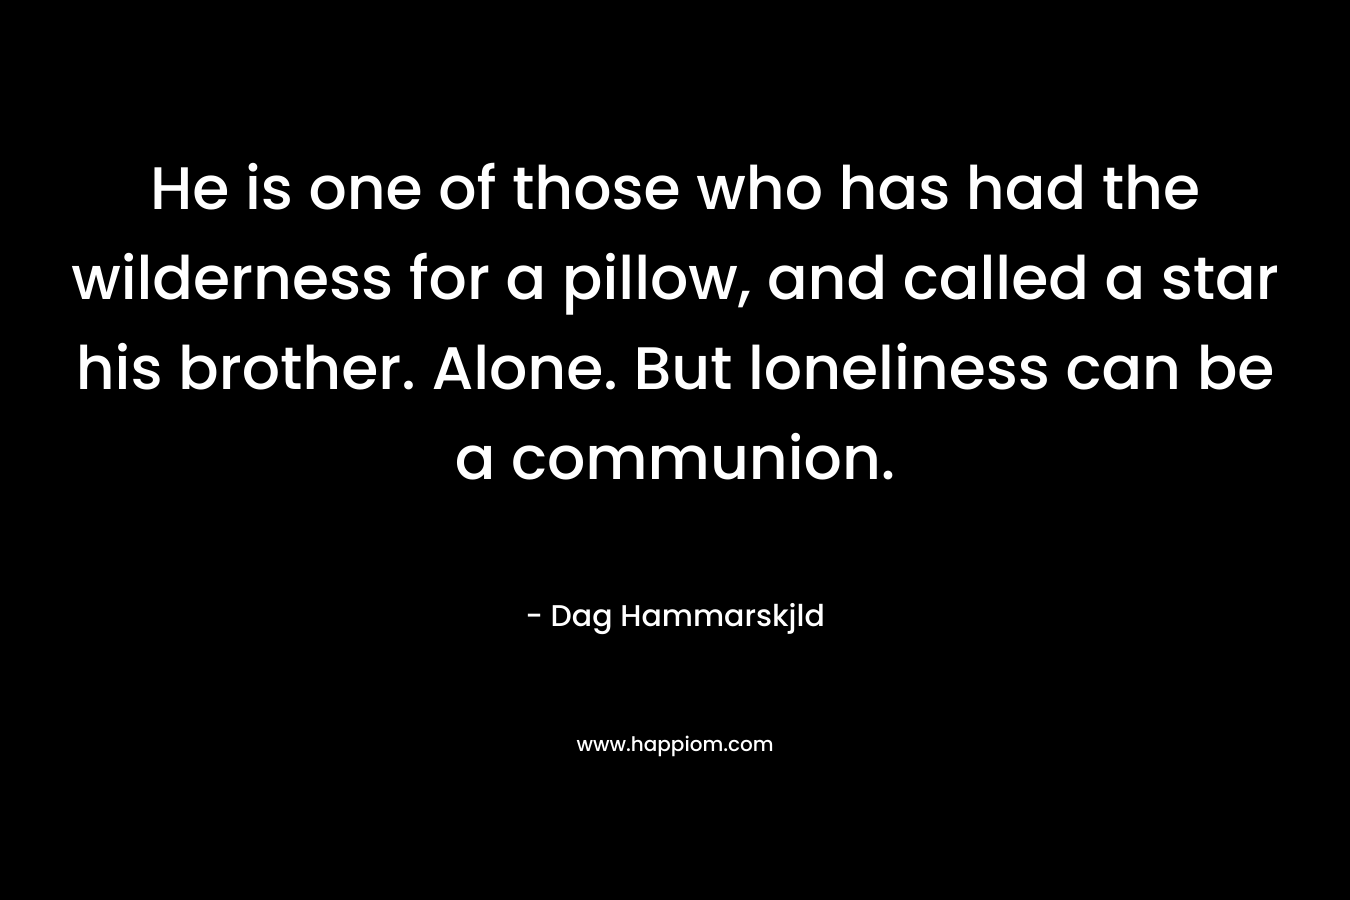 He is one of those who has had the wilderness for a pillow, and called a star his brother. Alone. But loneliness can be a communion.